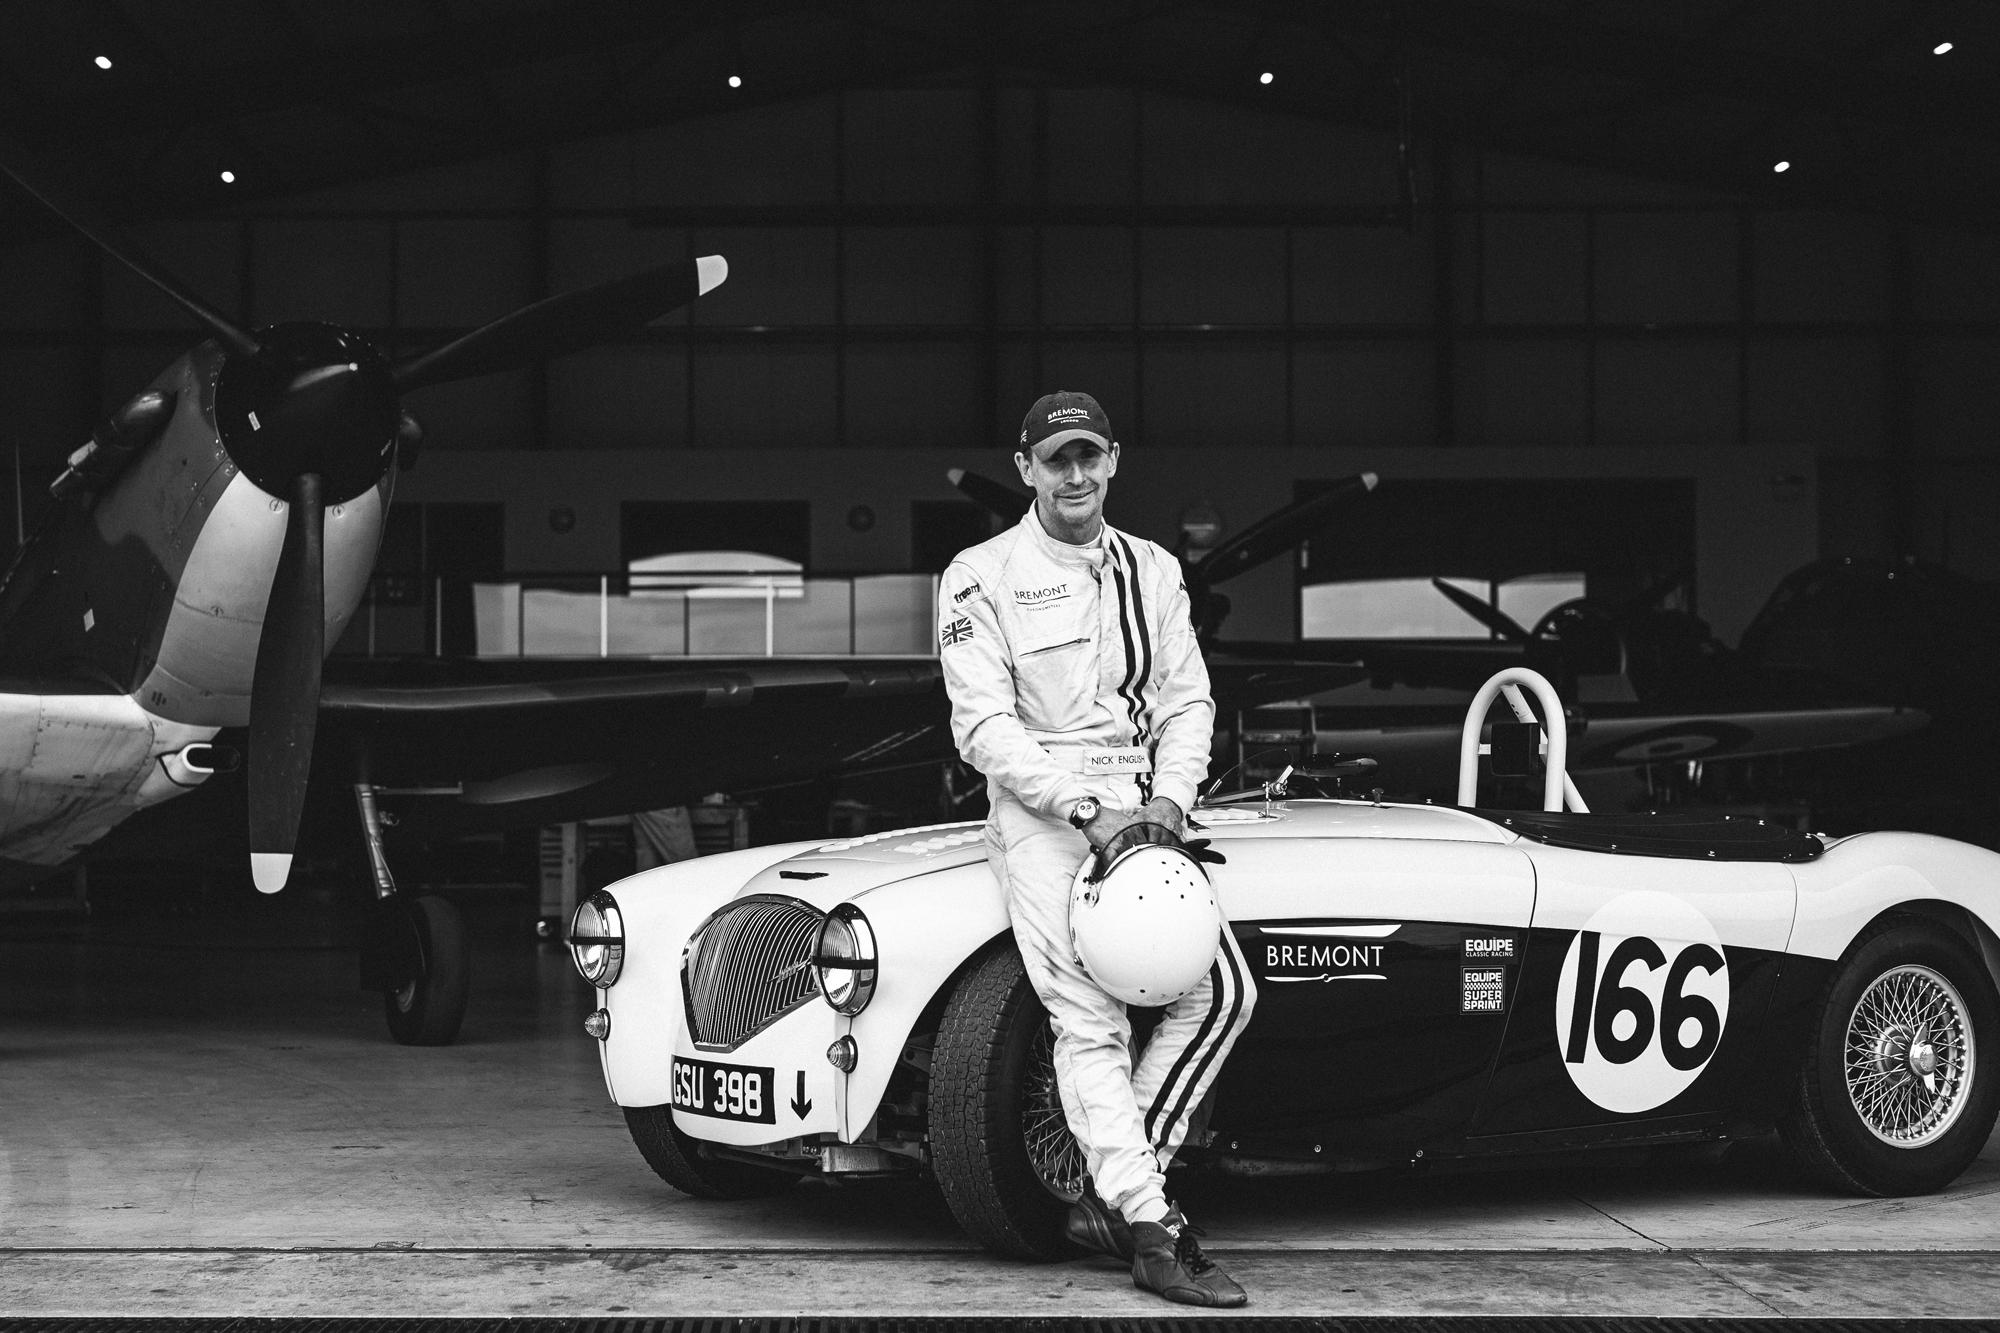 Bremont announced as The Classic timing partner